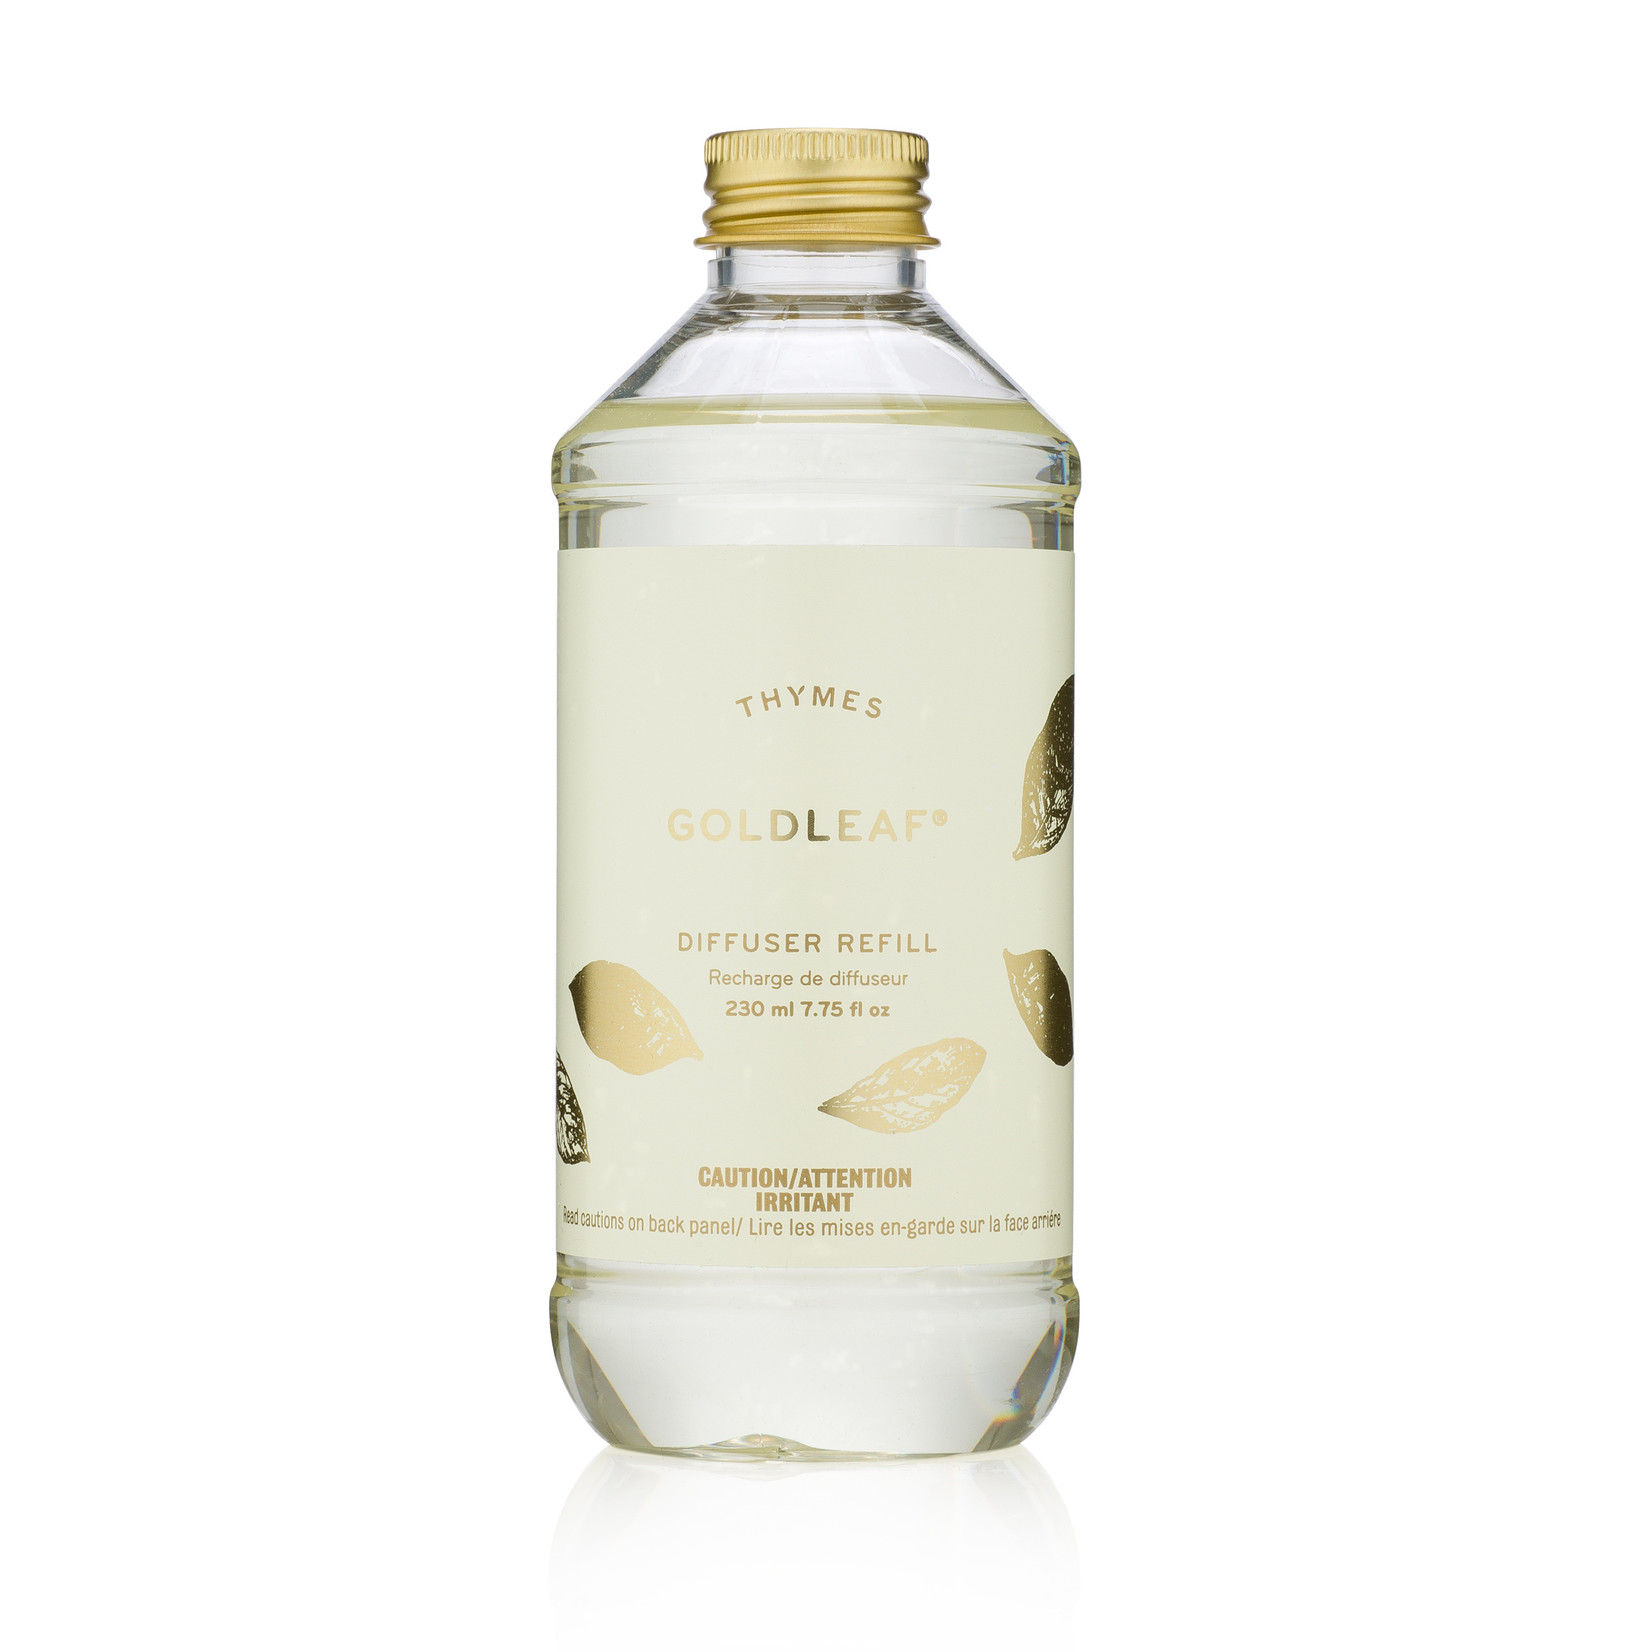 Thymes Diffuser Refill